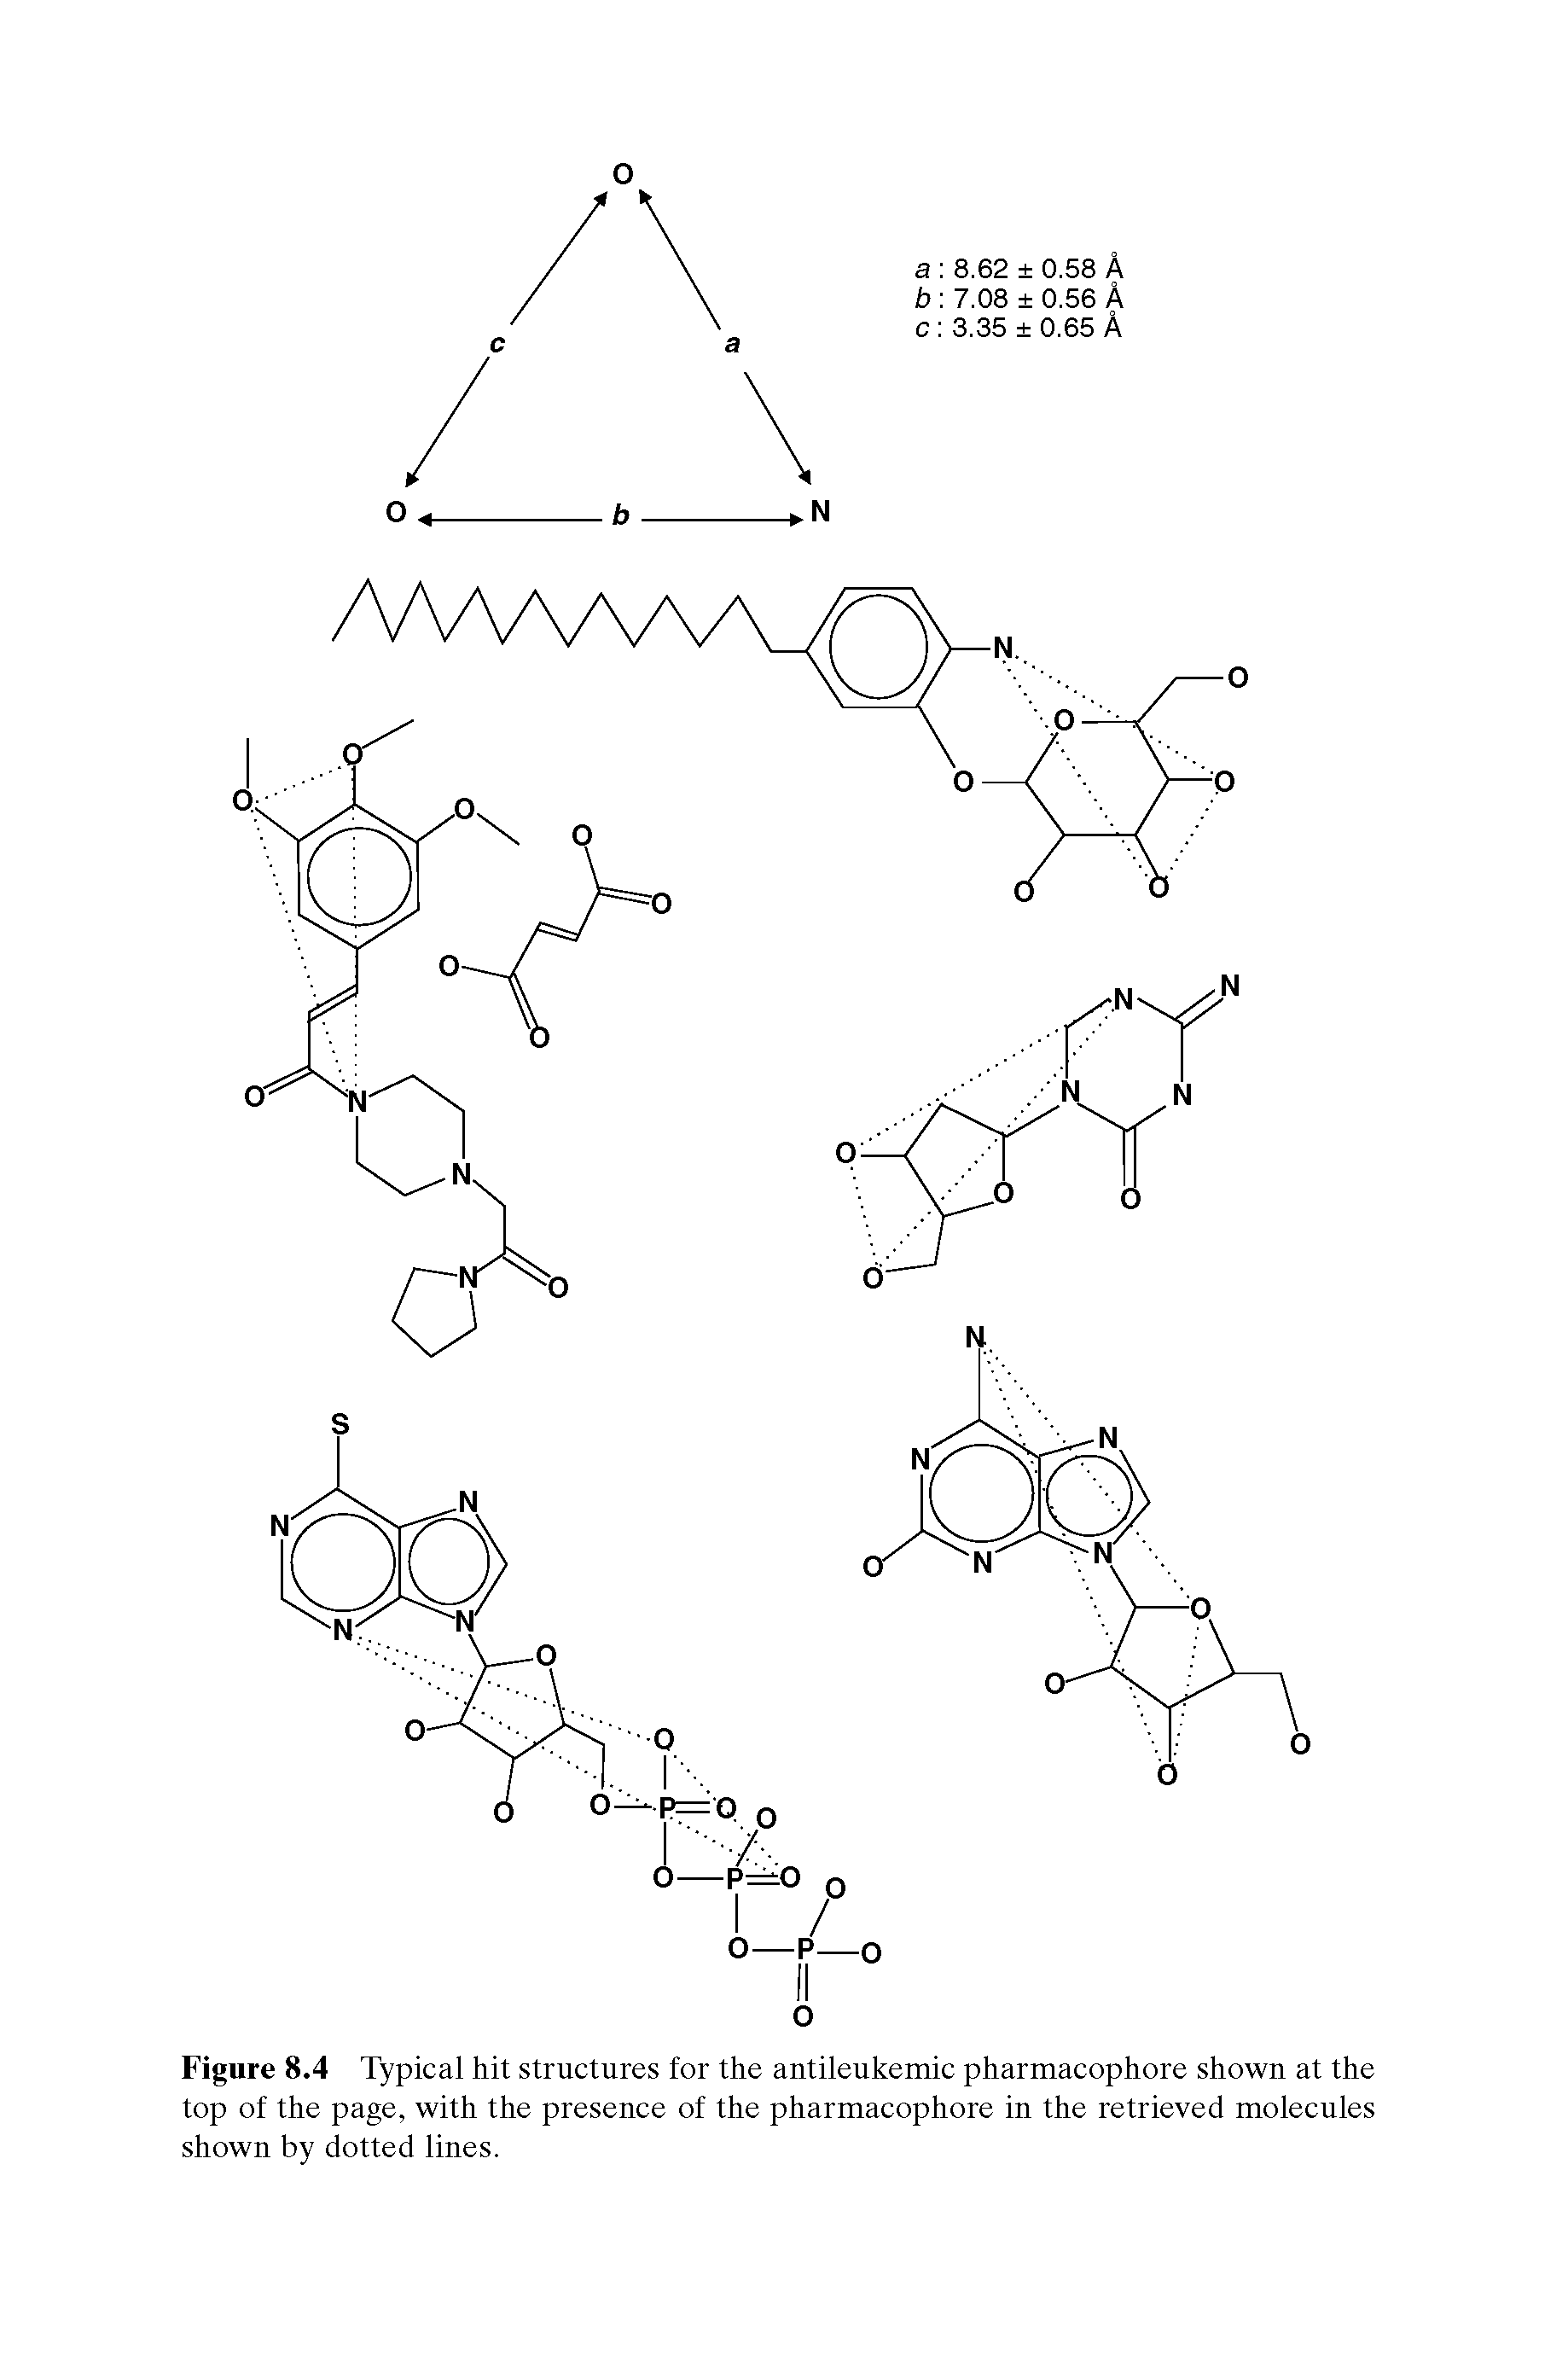 Figure 8.4 Typical hit structures for the antileukemic pharmacophore shown at the top of the page, with the presence of the pharmacophore in the retrieved molecules shown by dotted lines.